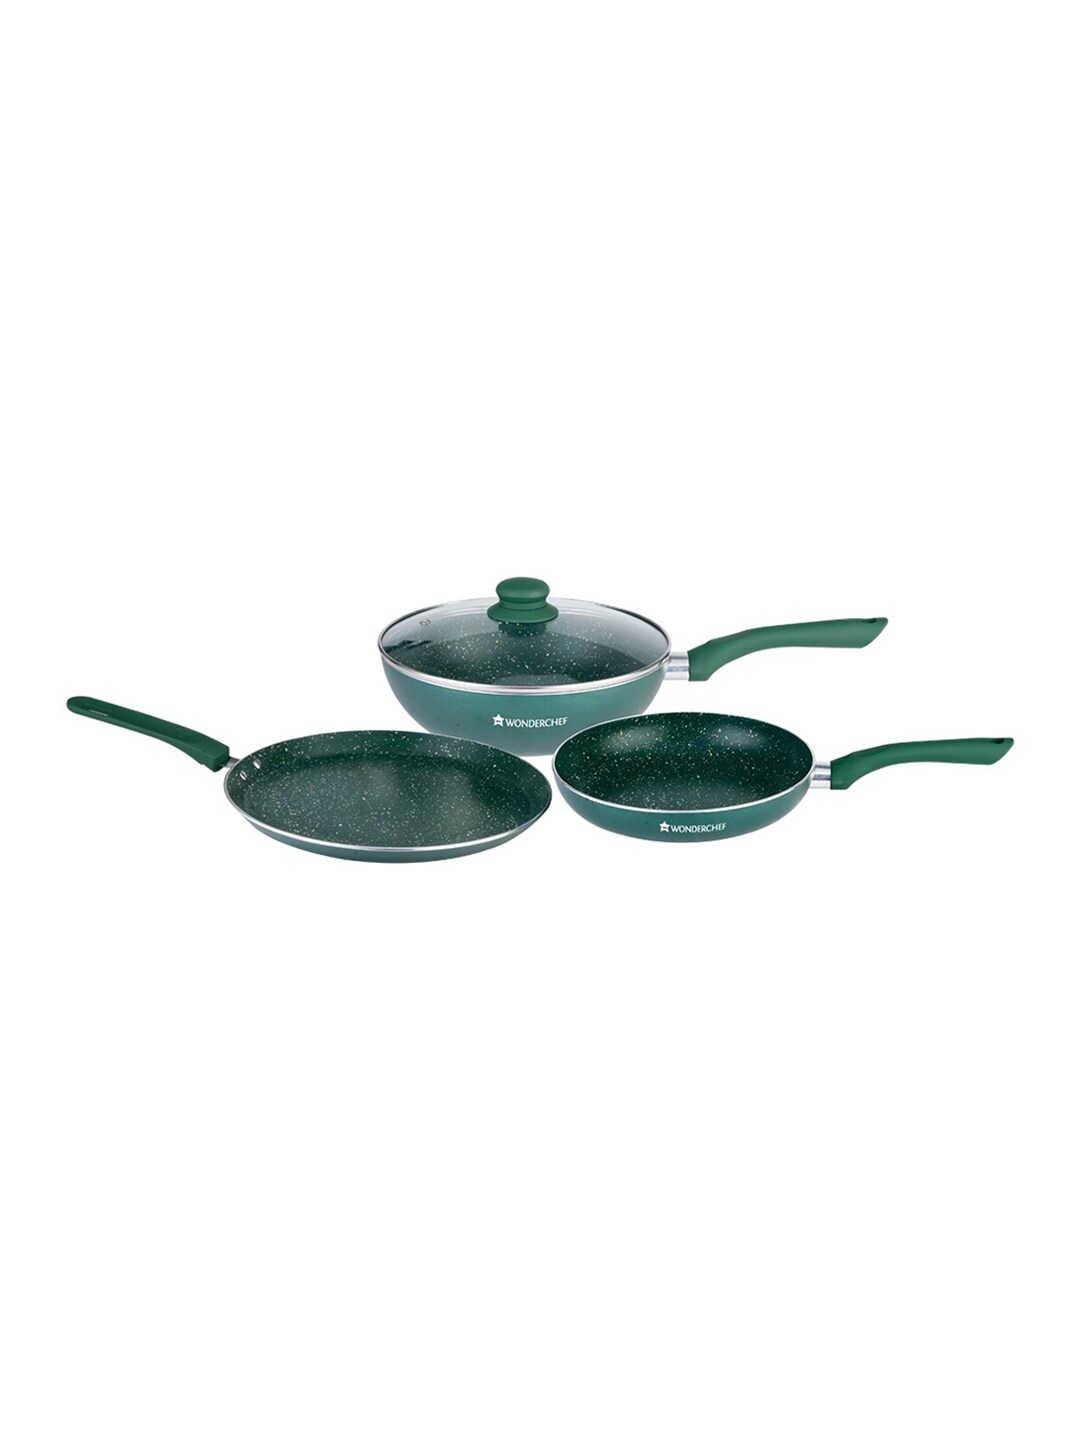 Wonderchef Set Of 3 Olive Green & Black Printed 5-Layer Non-Stick Cookware Price in India